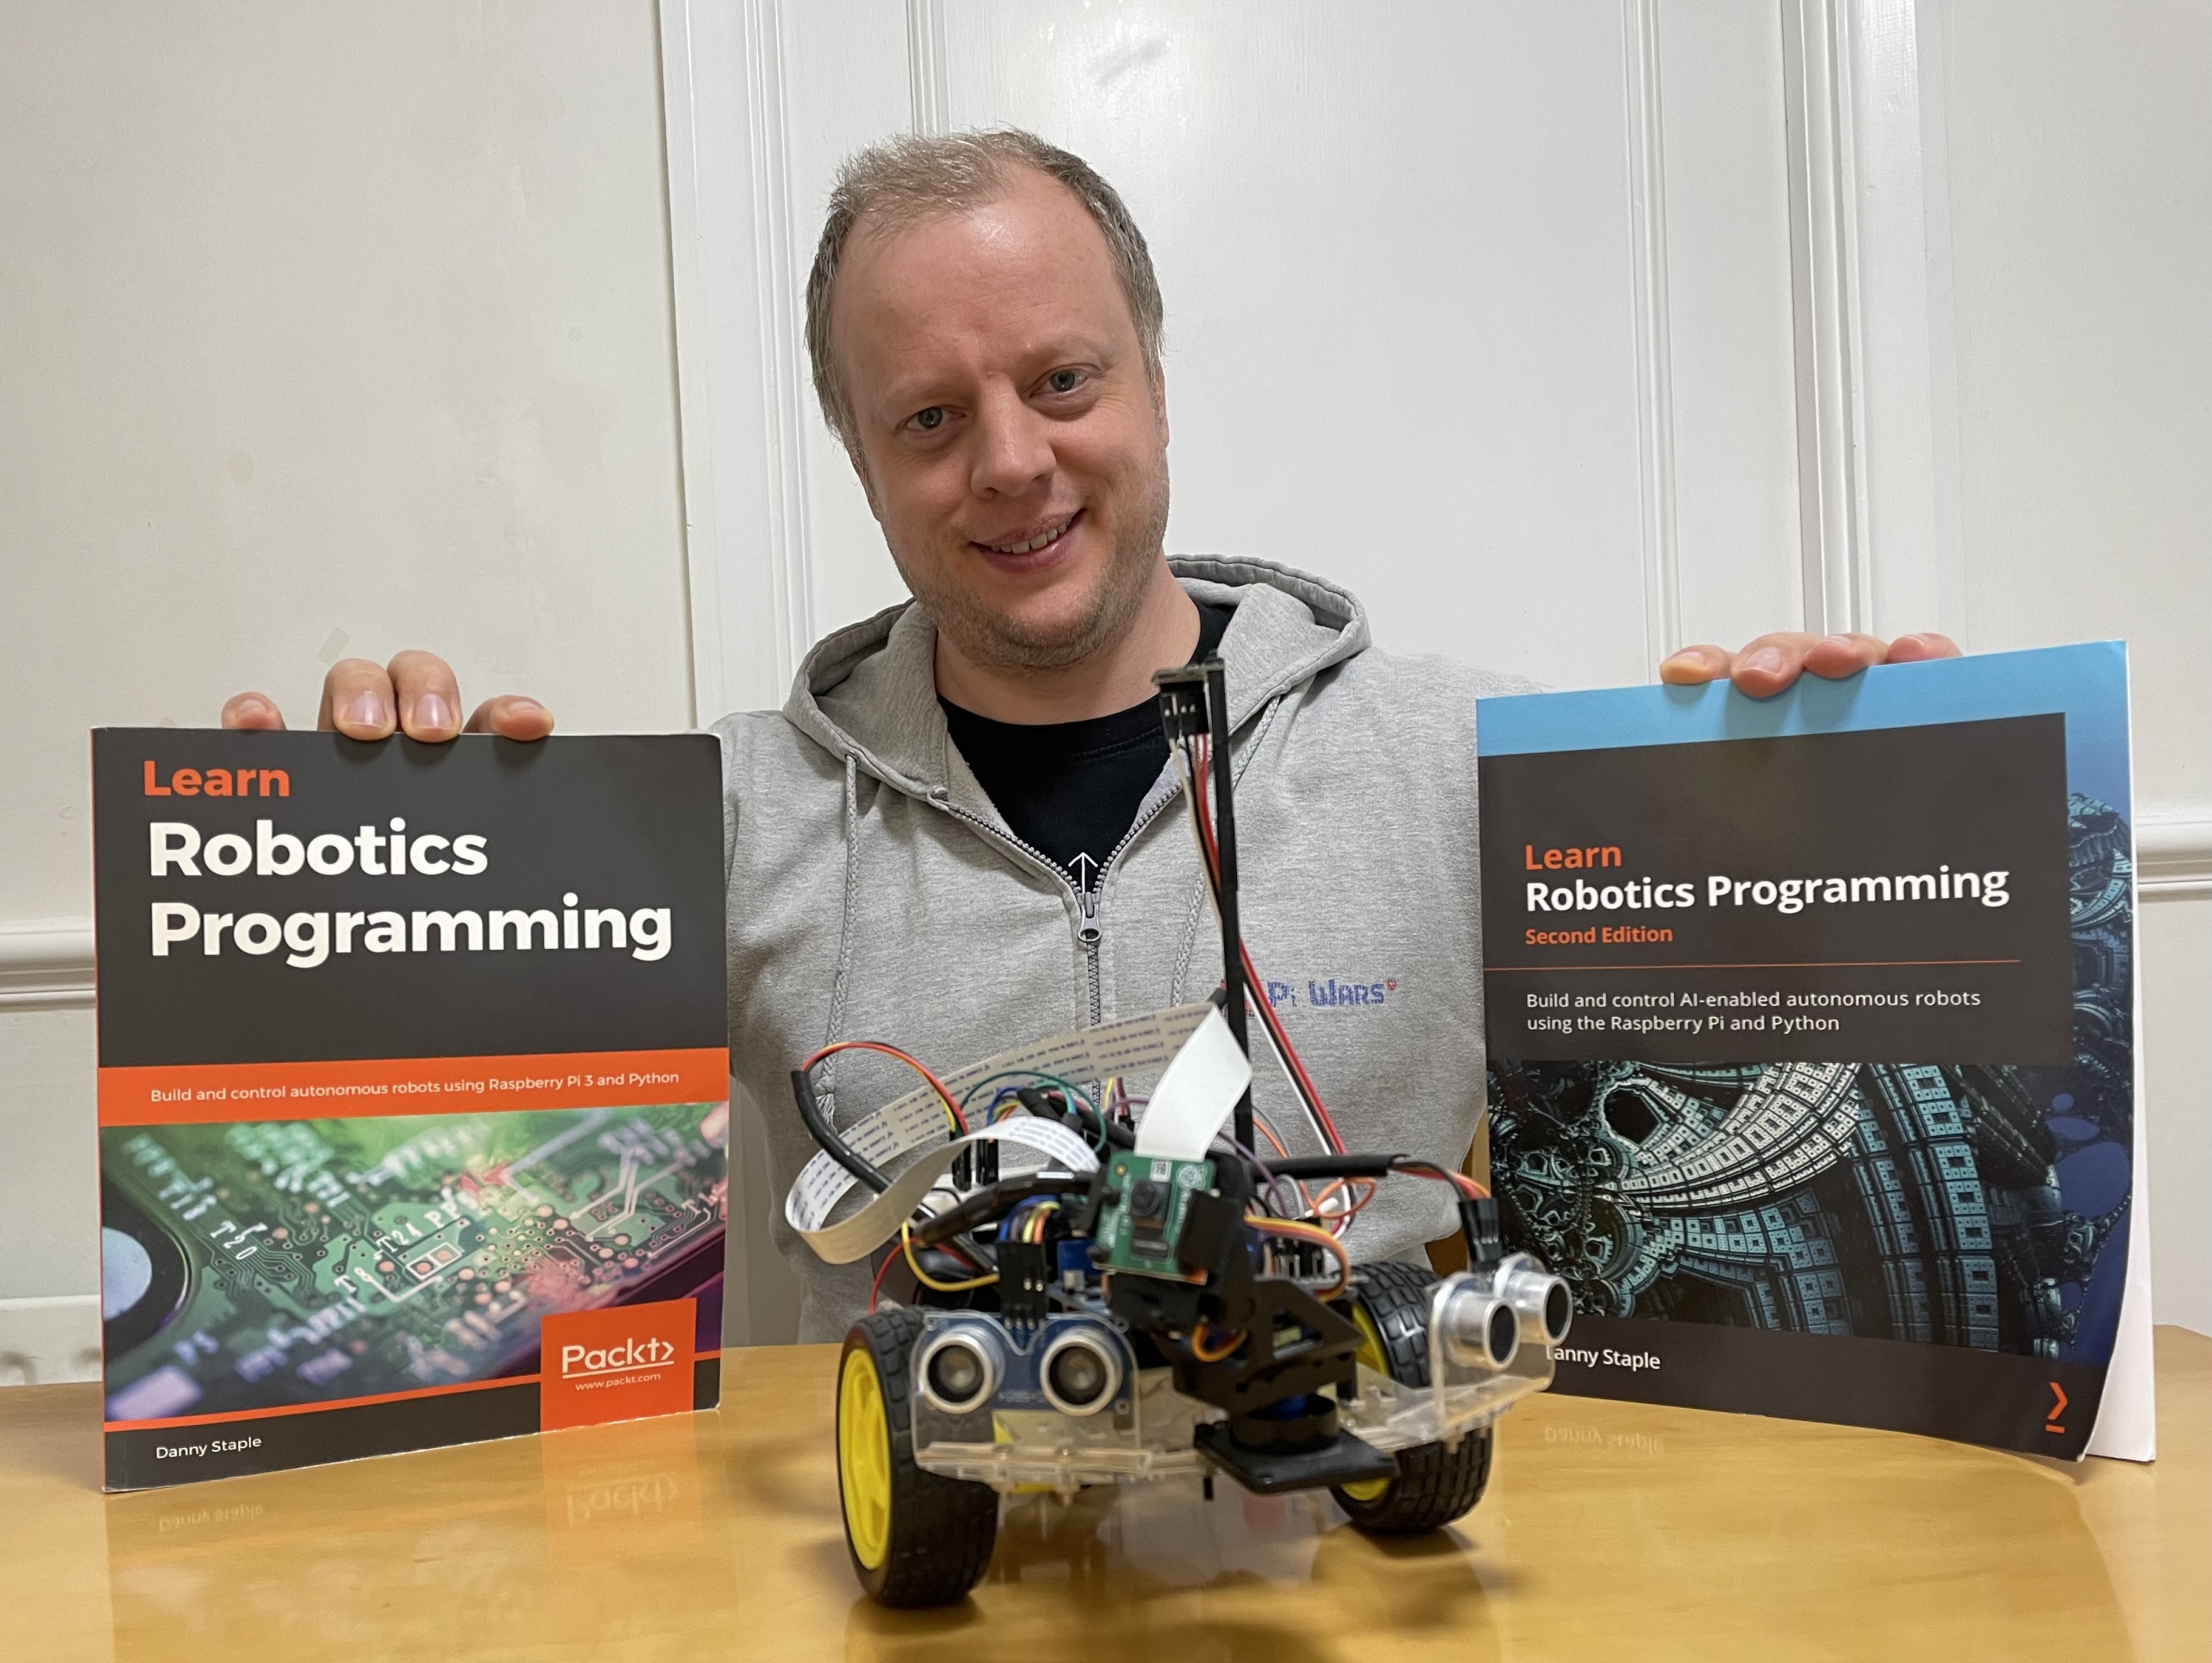 Danny pictured with the Learn Robotics Programming books